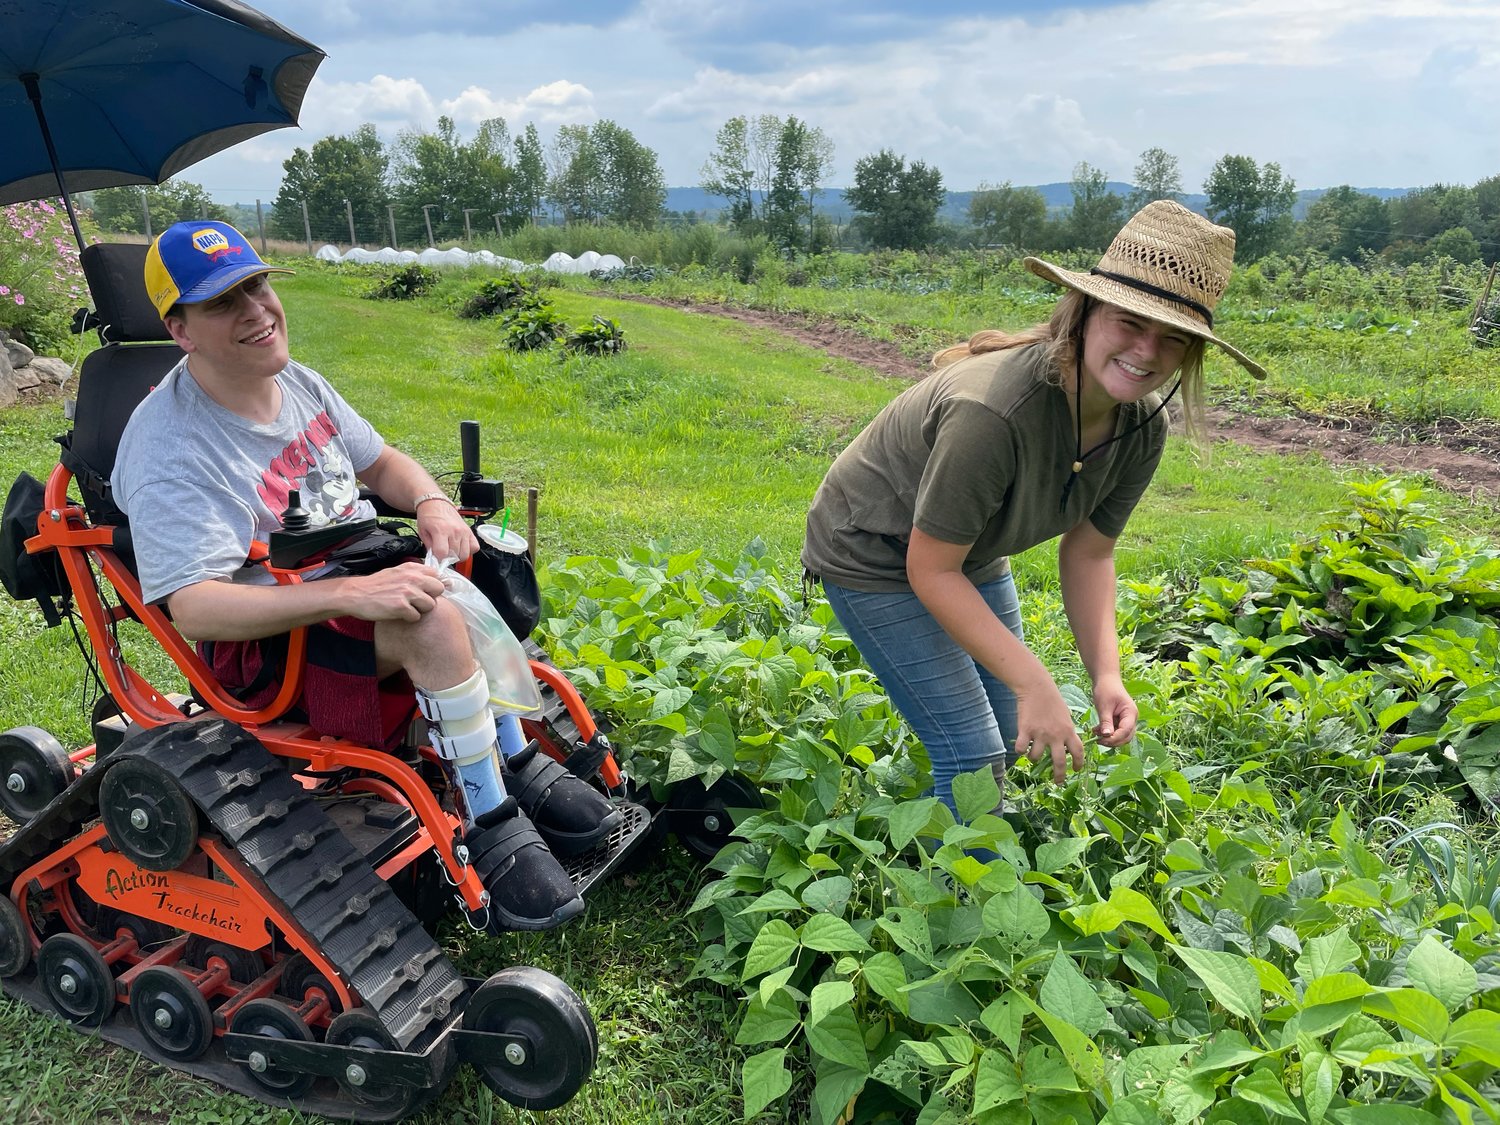 Volunteer Jay harvests beans with Carly, the farm/horticulture assistant.